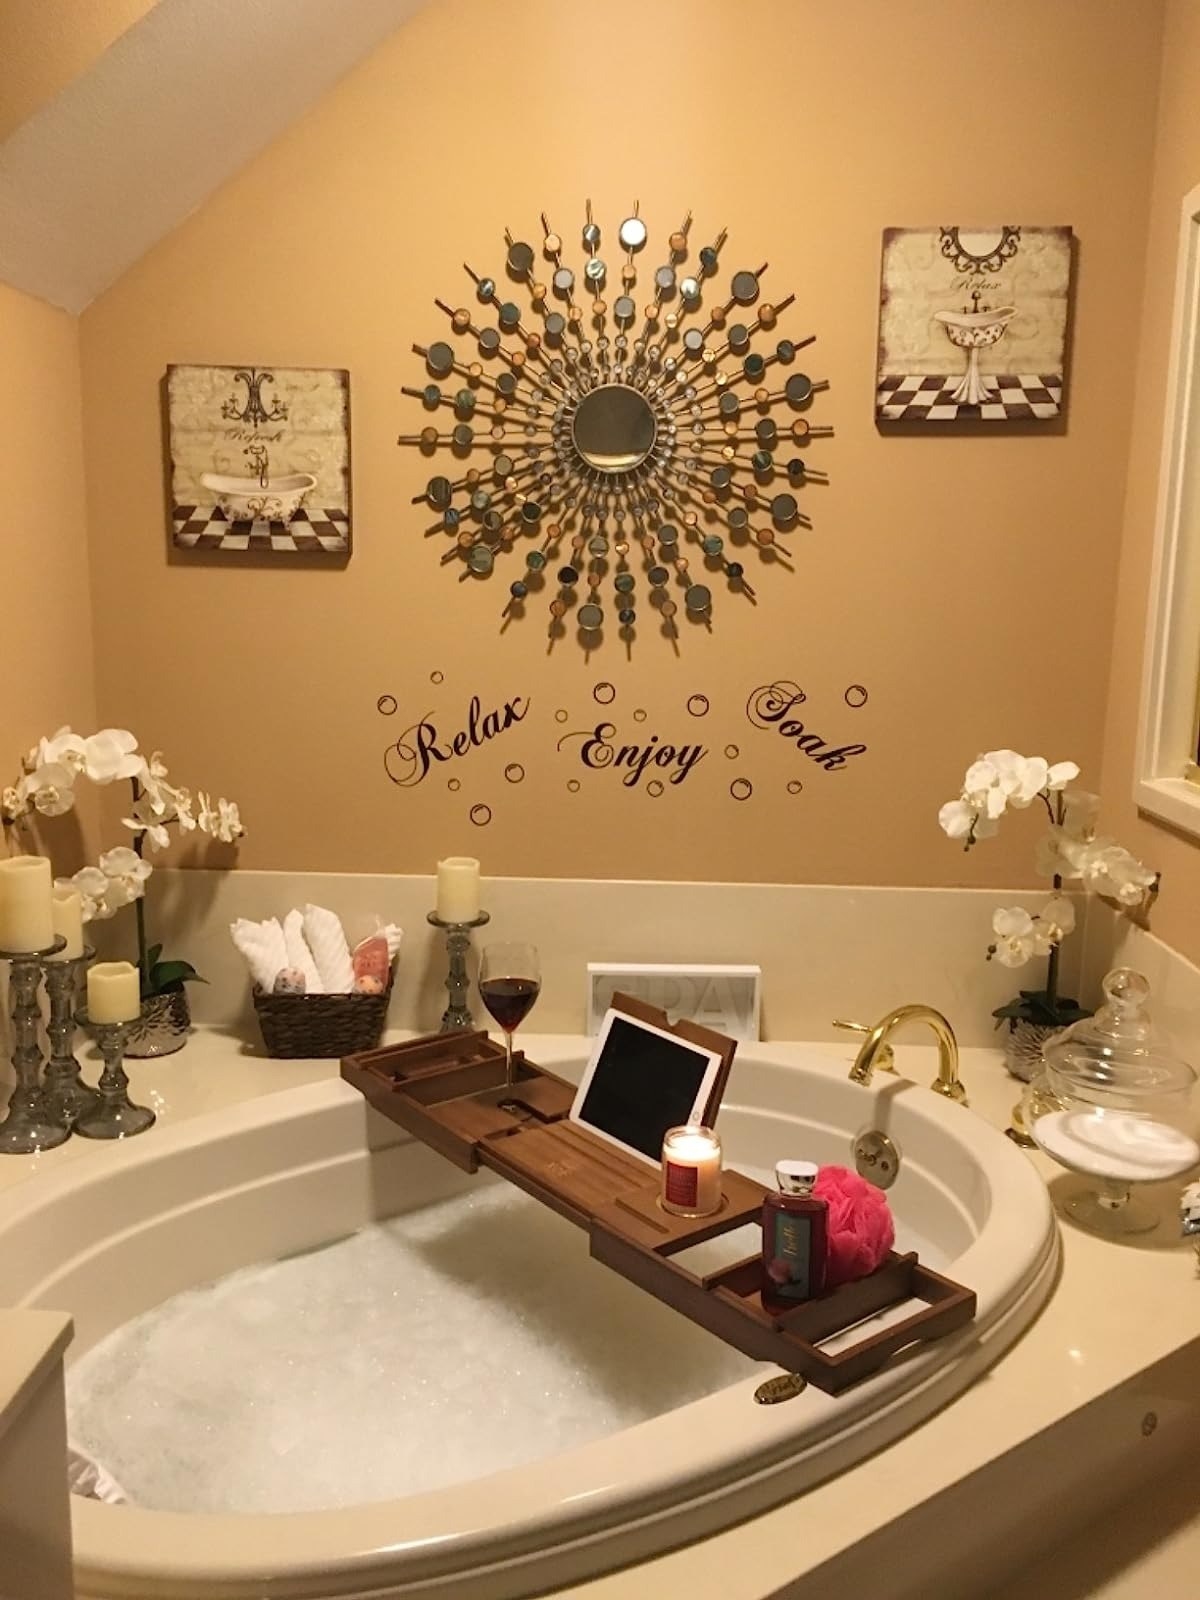 the bath caddy with an iPad, glass of wine, and lit candle above a jetted tub